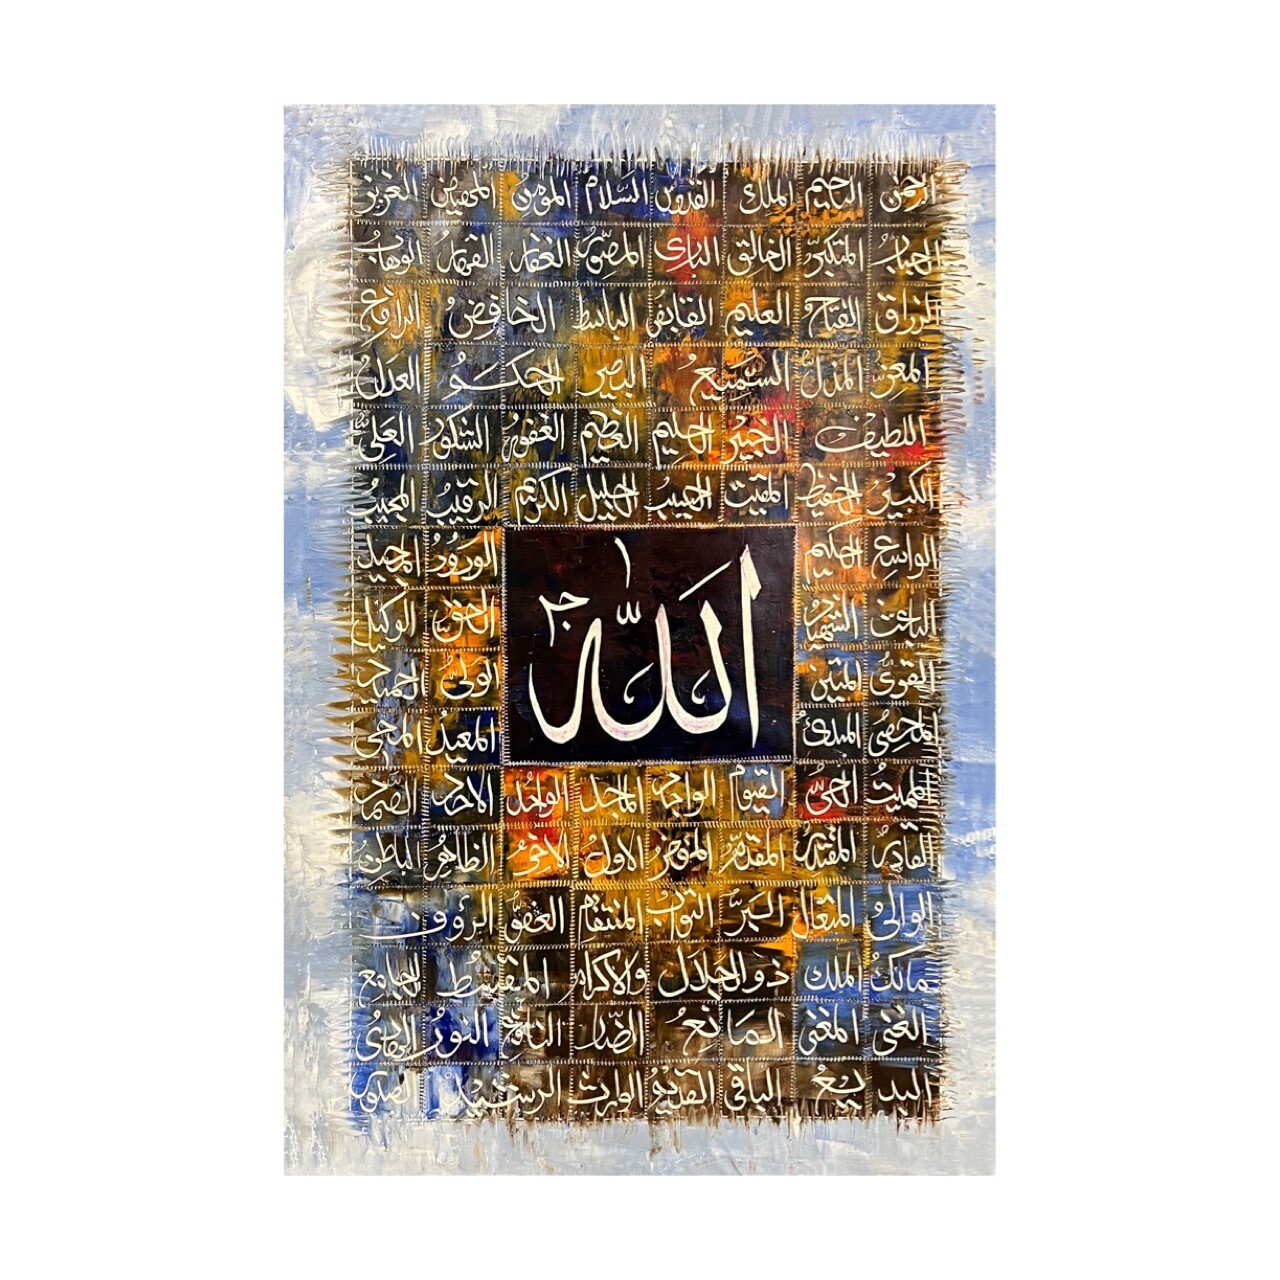 The 99 names of Allah Asmal Husna original hand engraved multi-colored oil painting